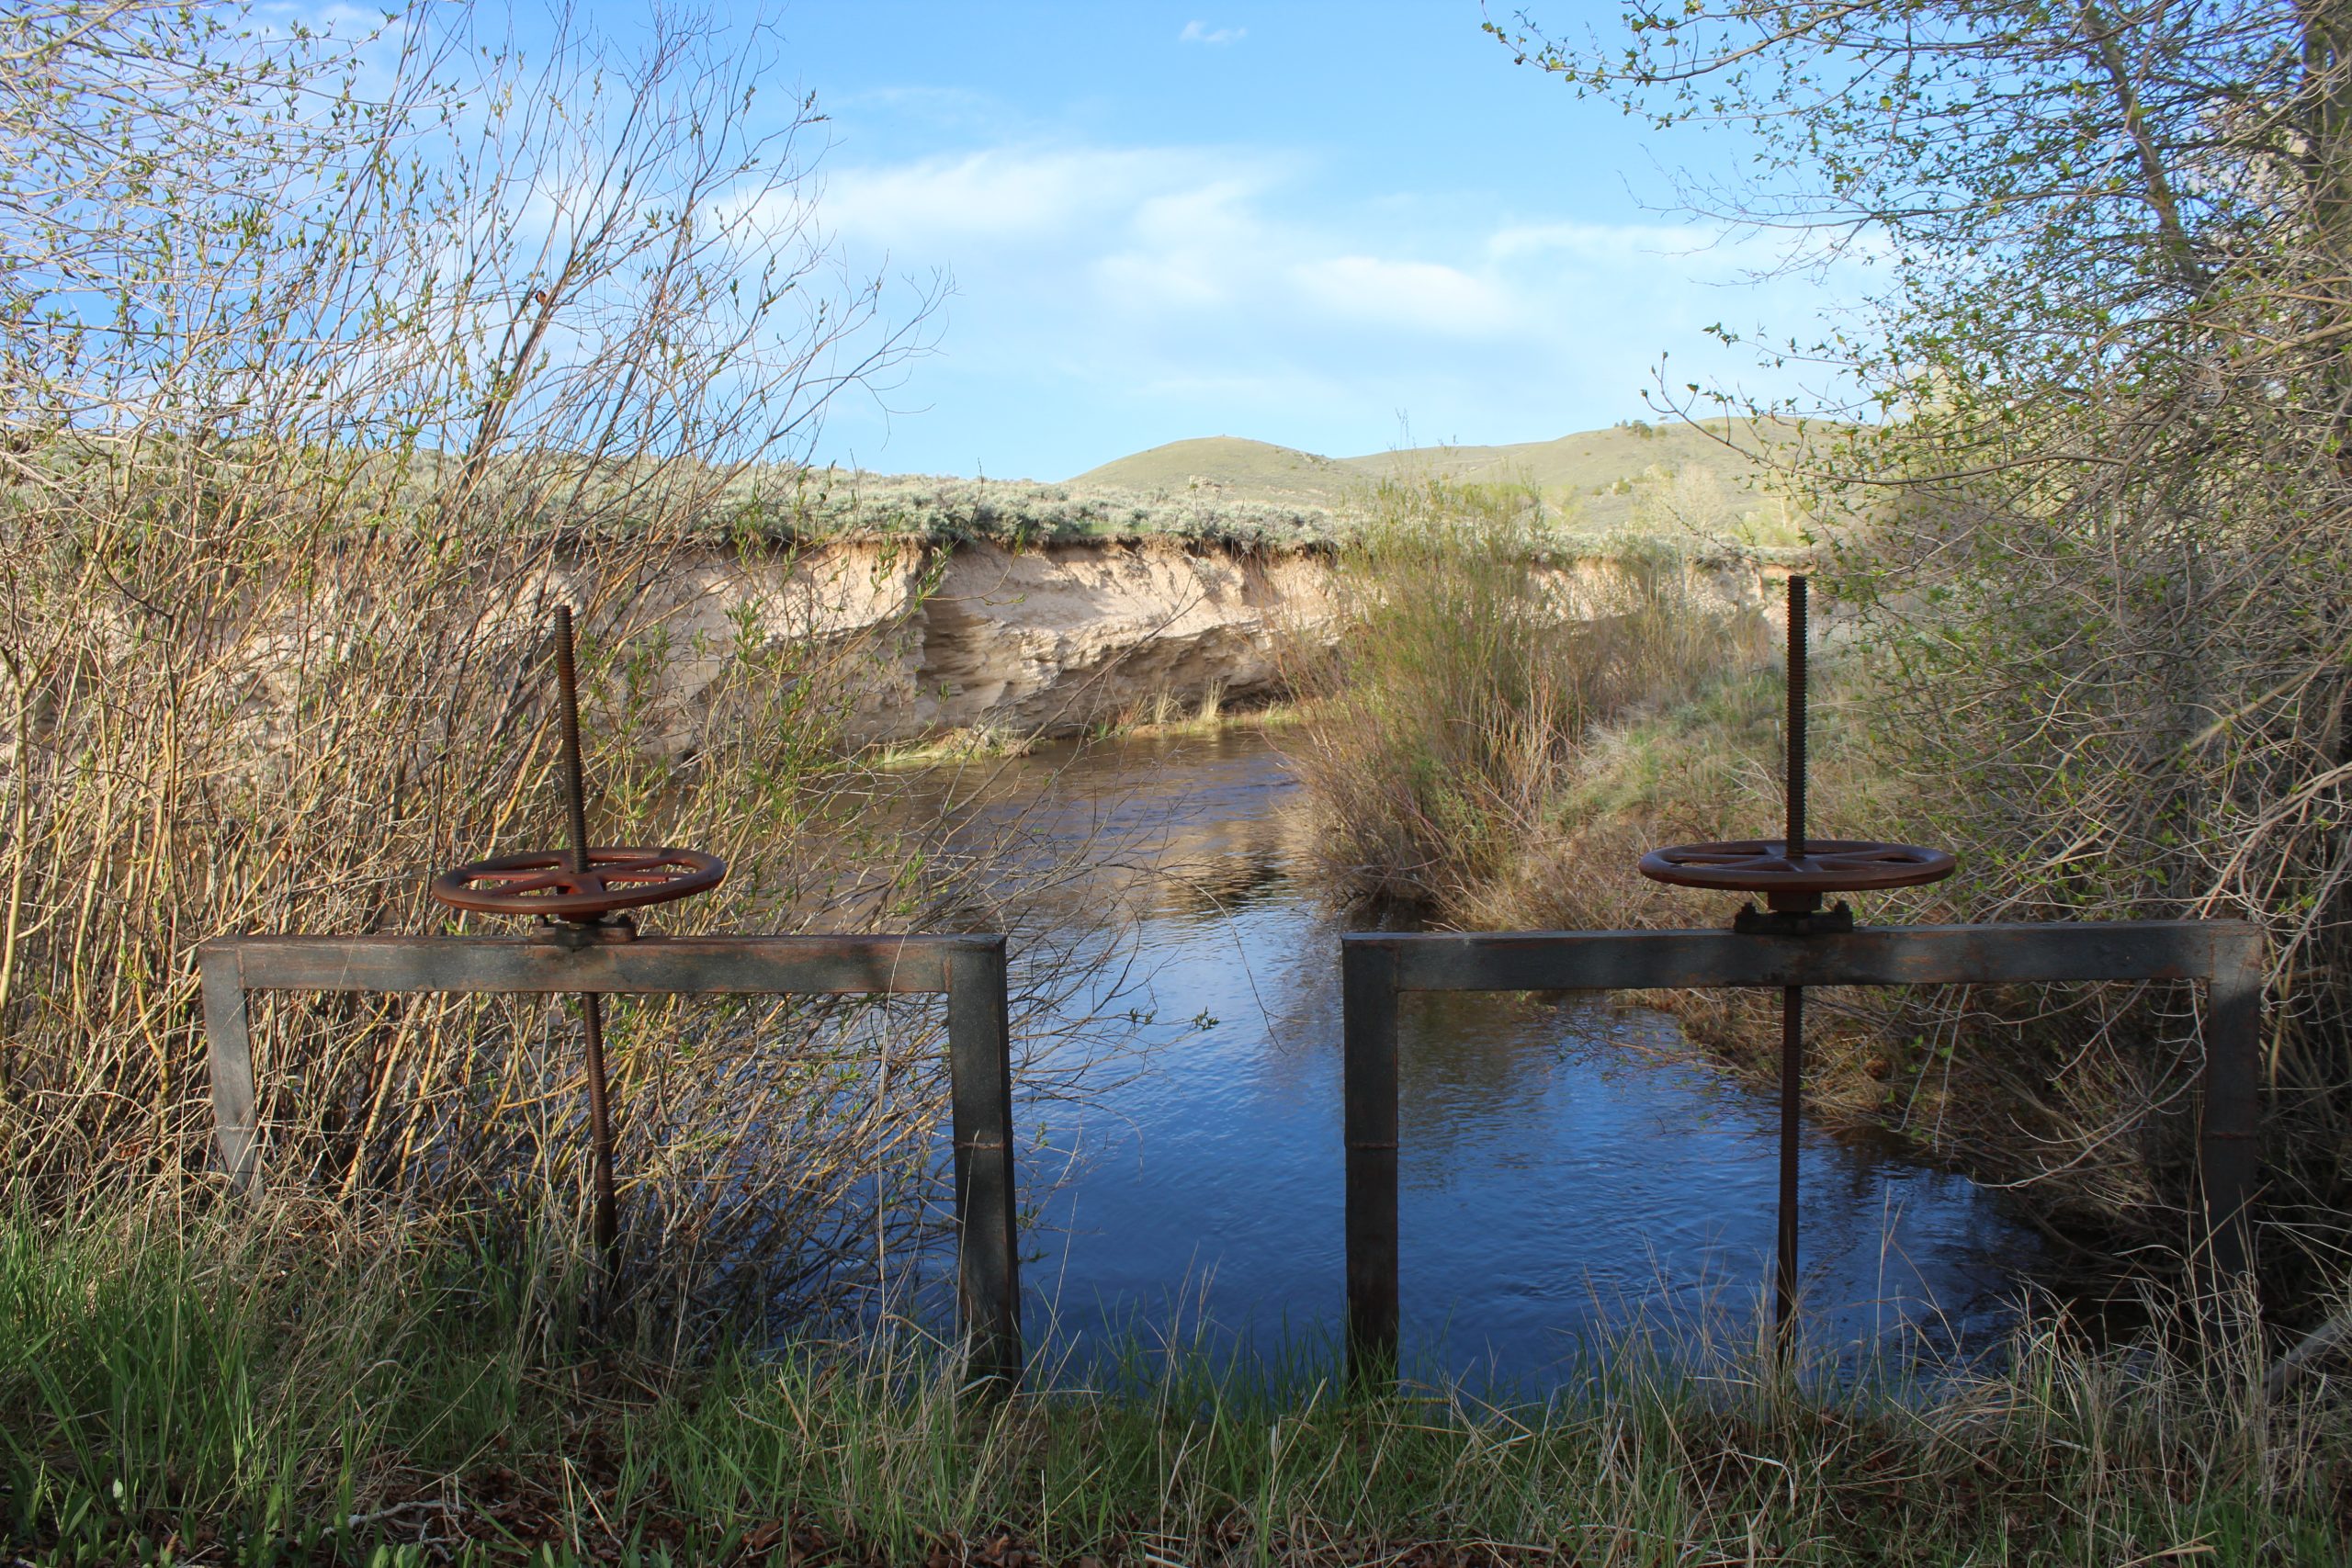 irrigation ditch flowing toward two headgates on a sunny day